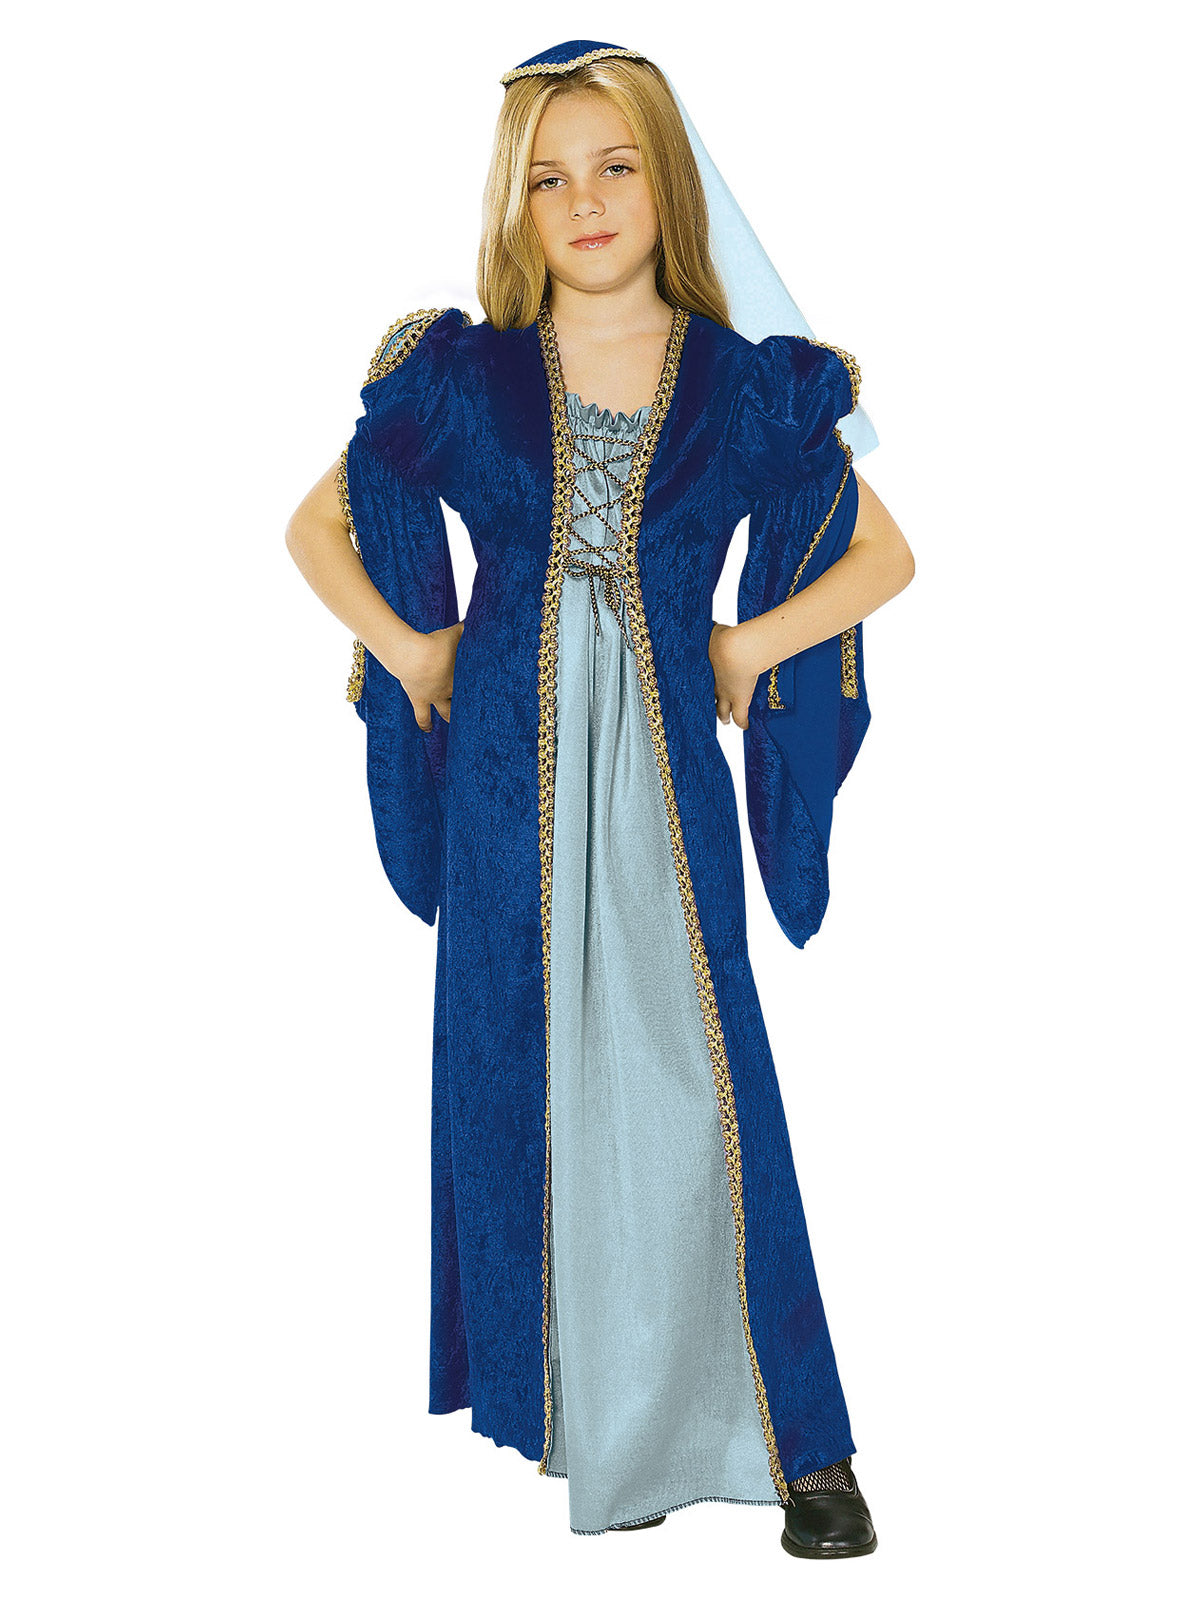 Juliet Classic Girl's Medieval Princess Costume